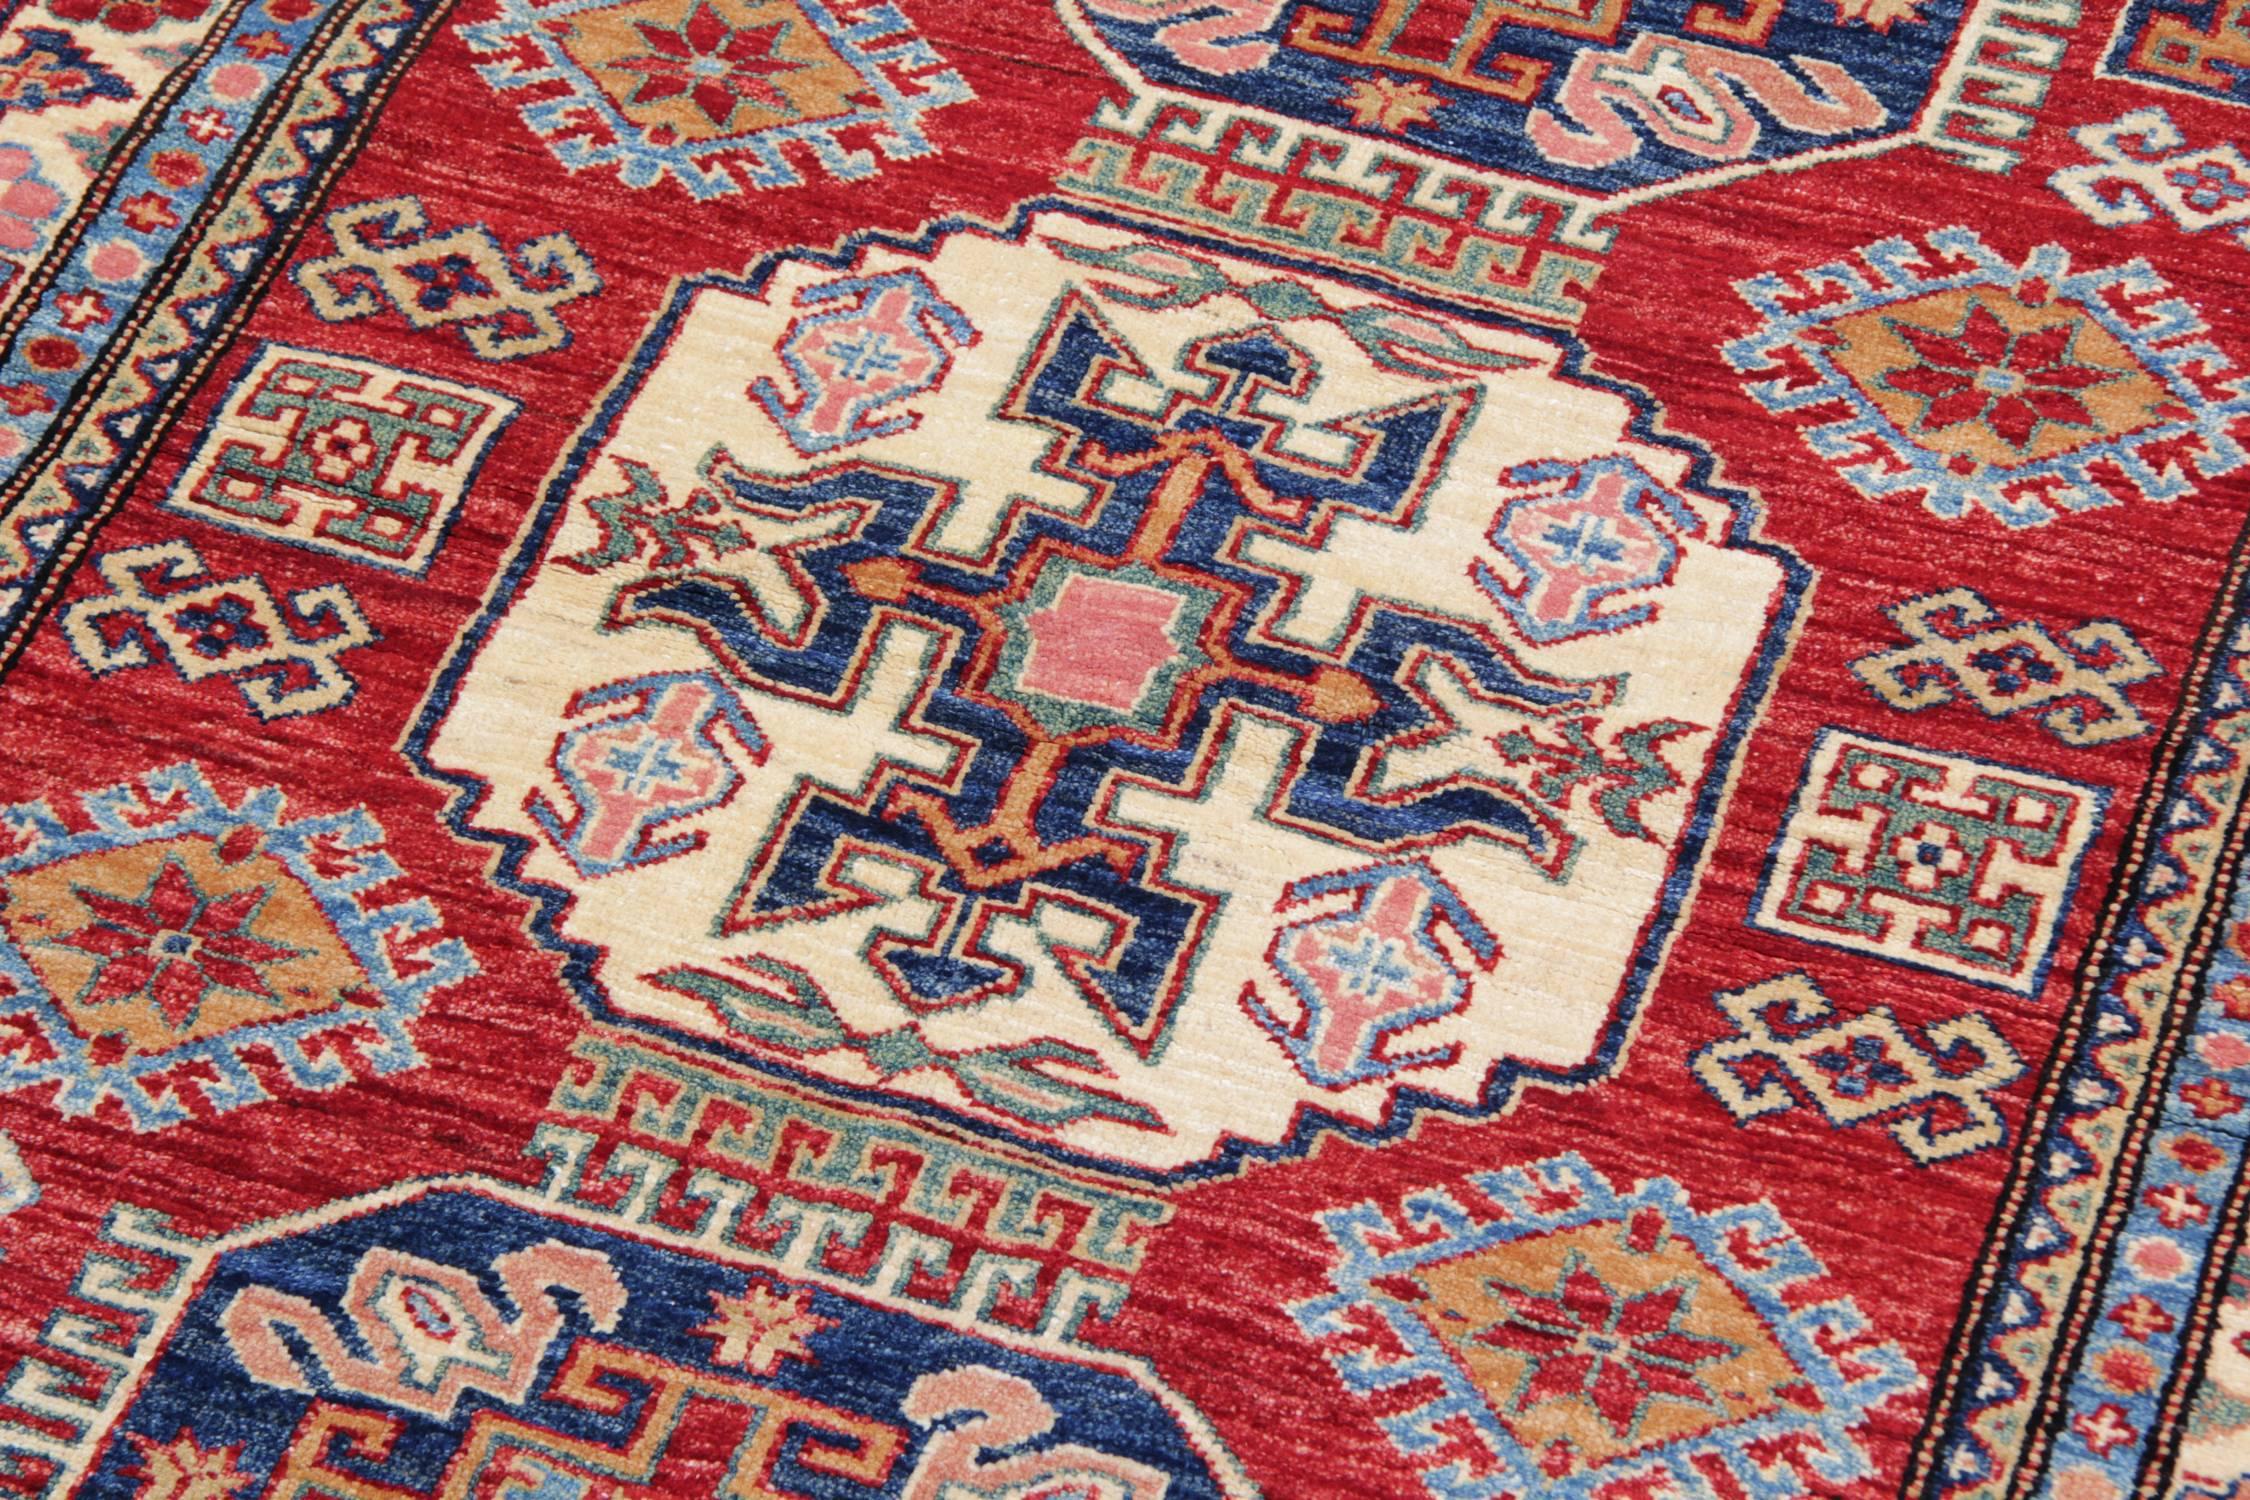 These new traditional handmade rugs are featuring designs from the Kazak region. A traditional tribal rug is famous in the region of the Kazak Area. This handwoven rug has been made by Afghan weavers of top quality wool and cotton. This carpet rug